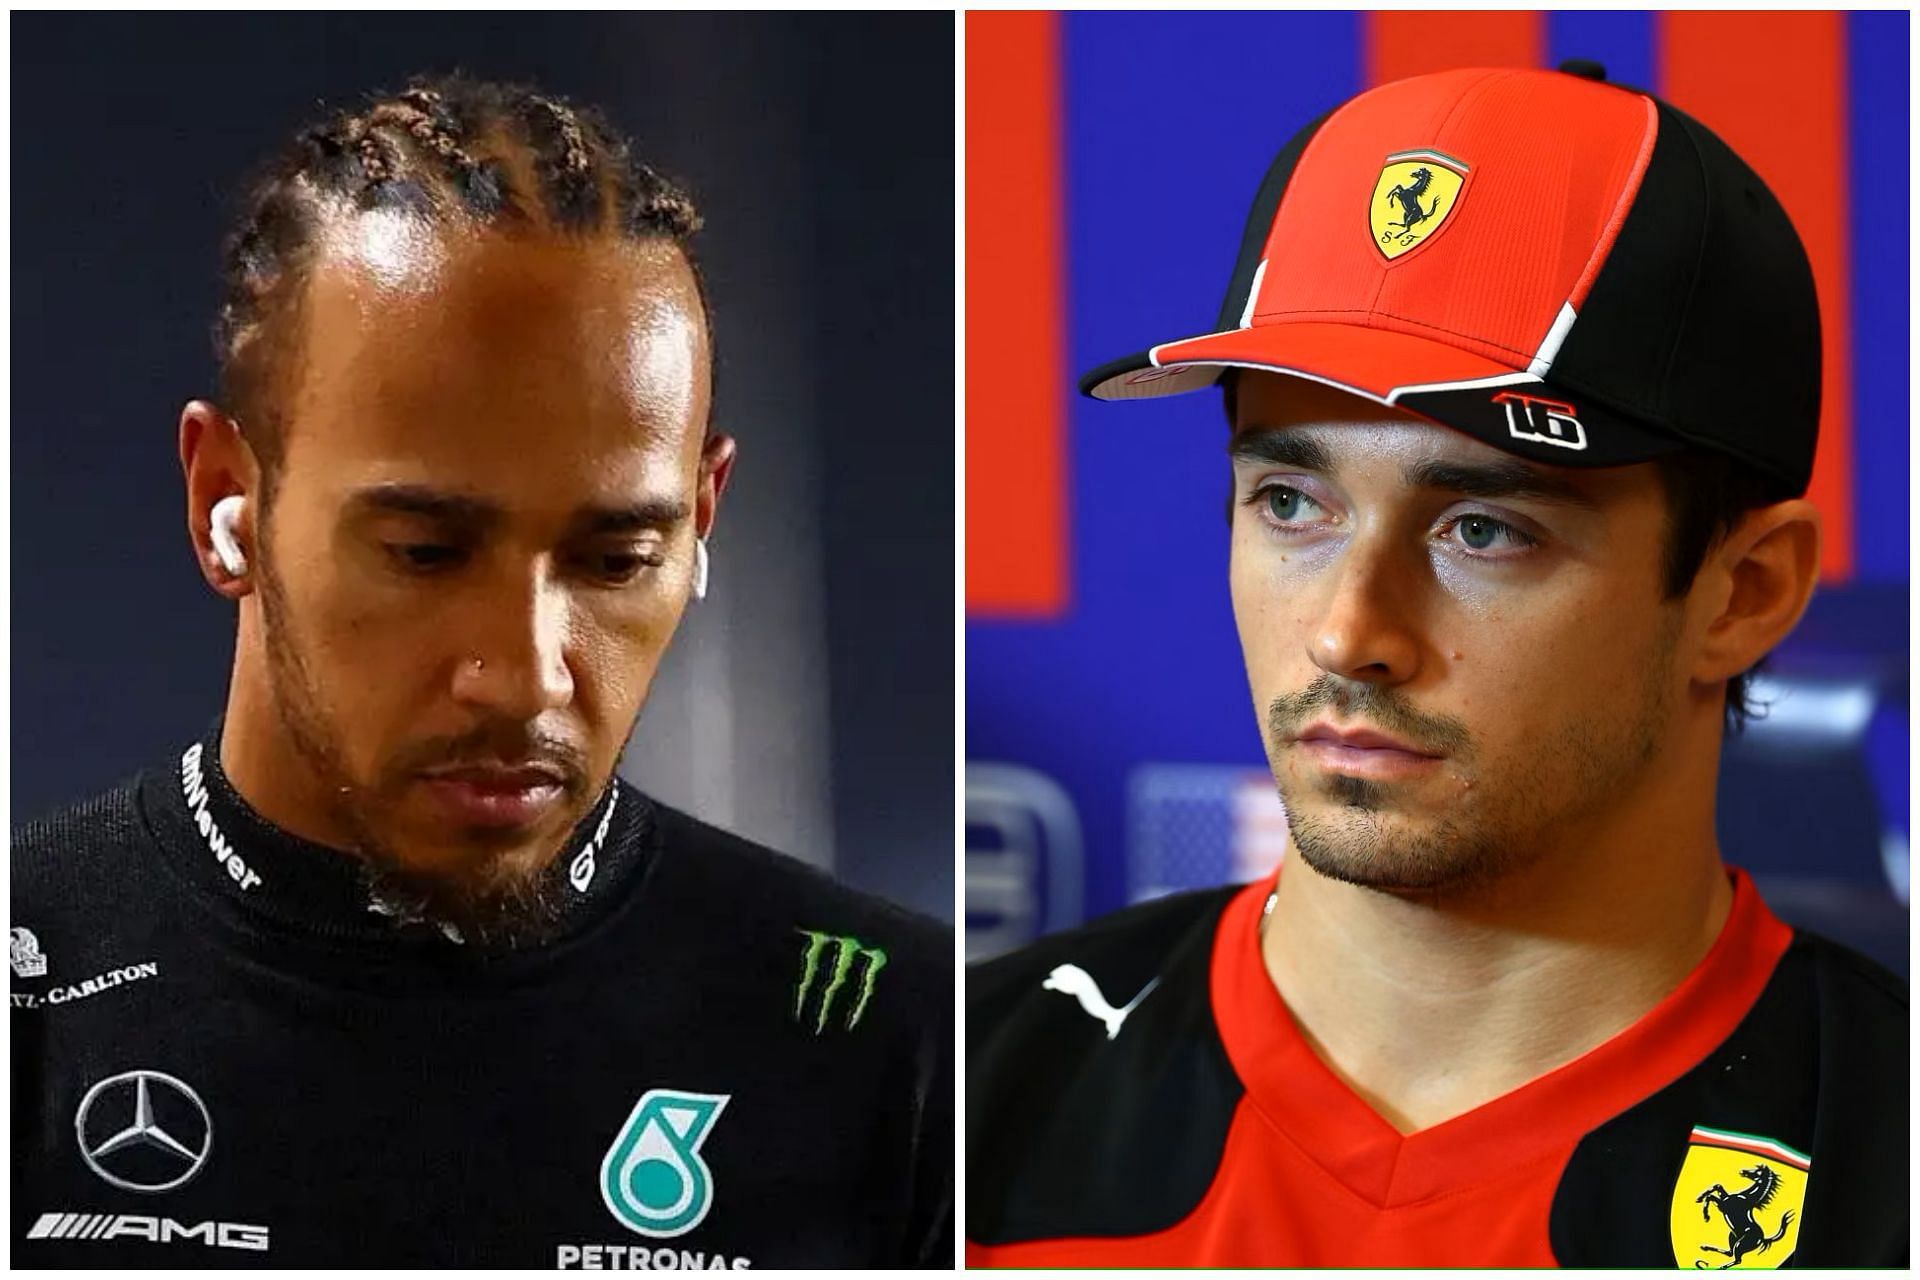 Lewis Hamilton (L) and Charles Leclerc (R) were disqualified from the 2023 F1 US GP due to excessive plank wear (Collage via Sportskeeda)